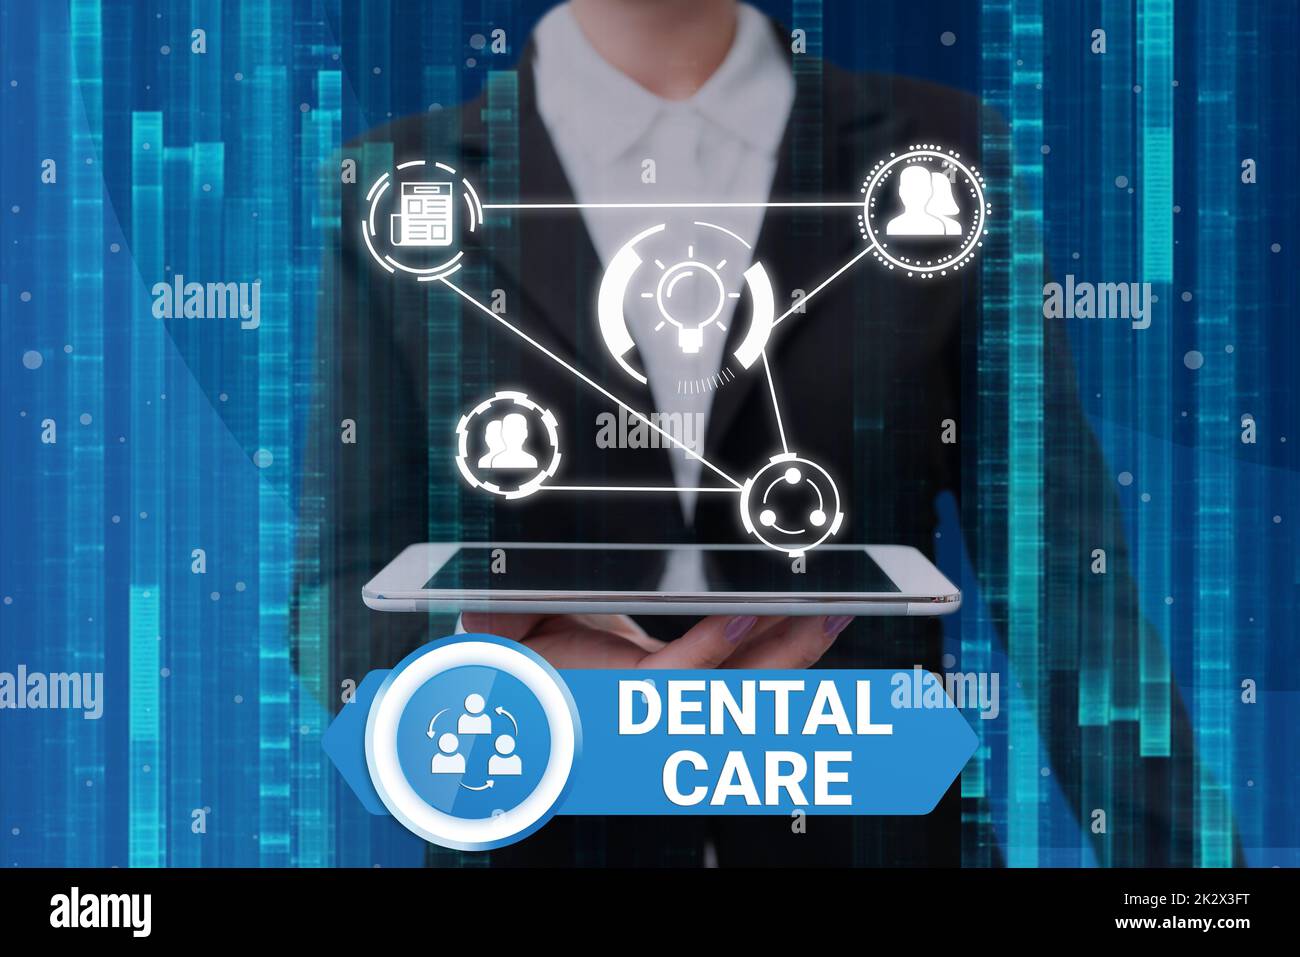 Writing displaying text Dental Care. Word Written on maintenance of healthy teeth or to keep it clean for future Lady in suit holding electrical tablet presenting innovative thinking. Stock Photo